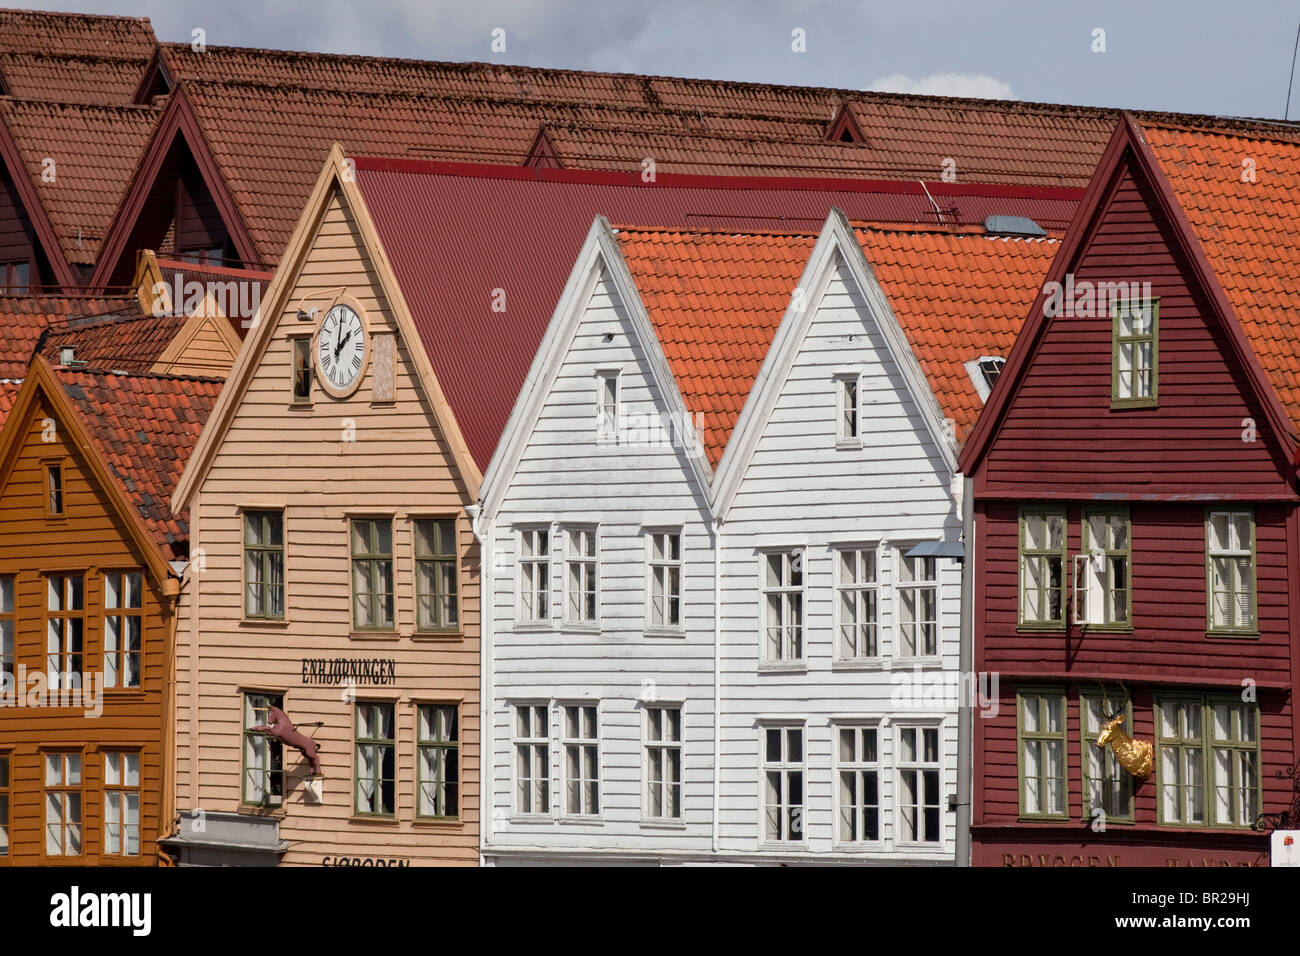 Bryggen wooden boarded offices sheds warehouses, Bergen, Norway Stock Photo